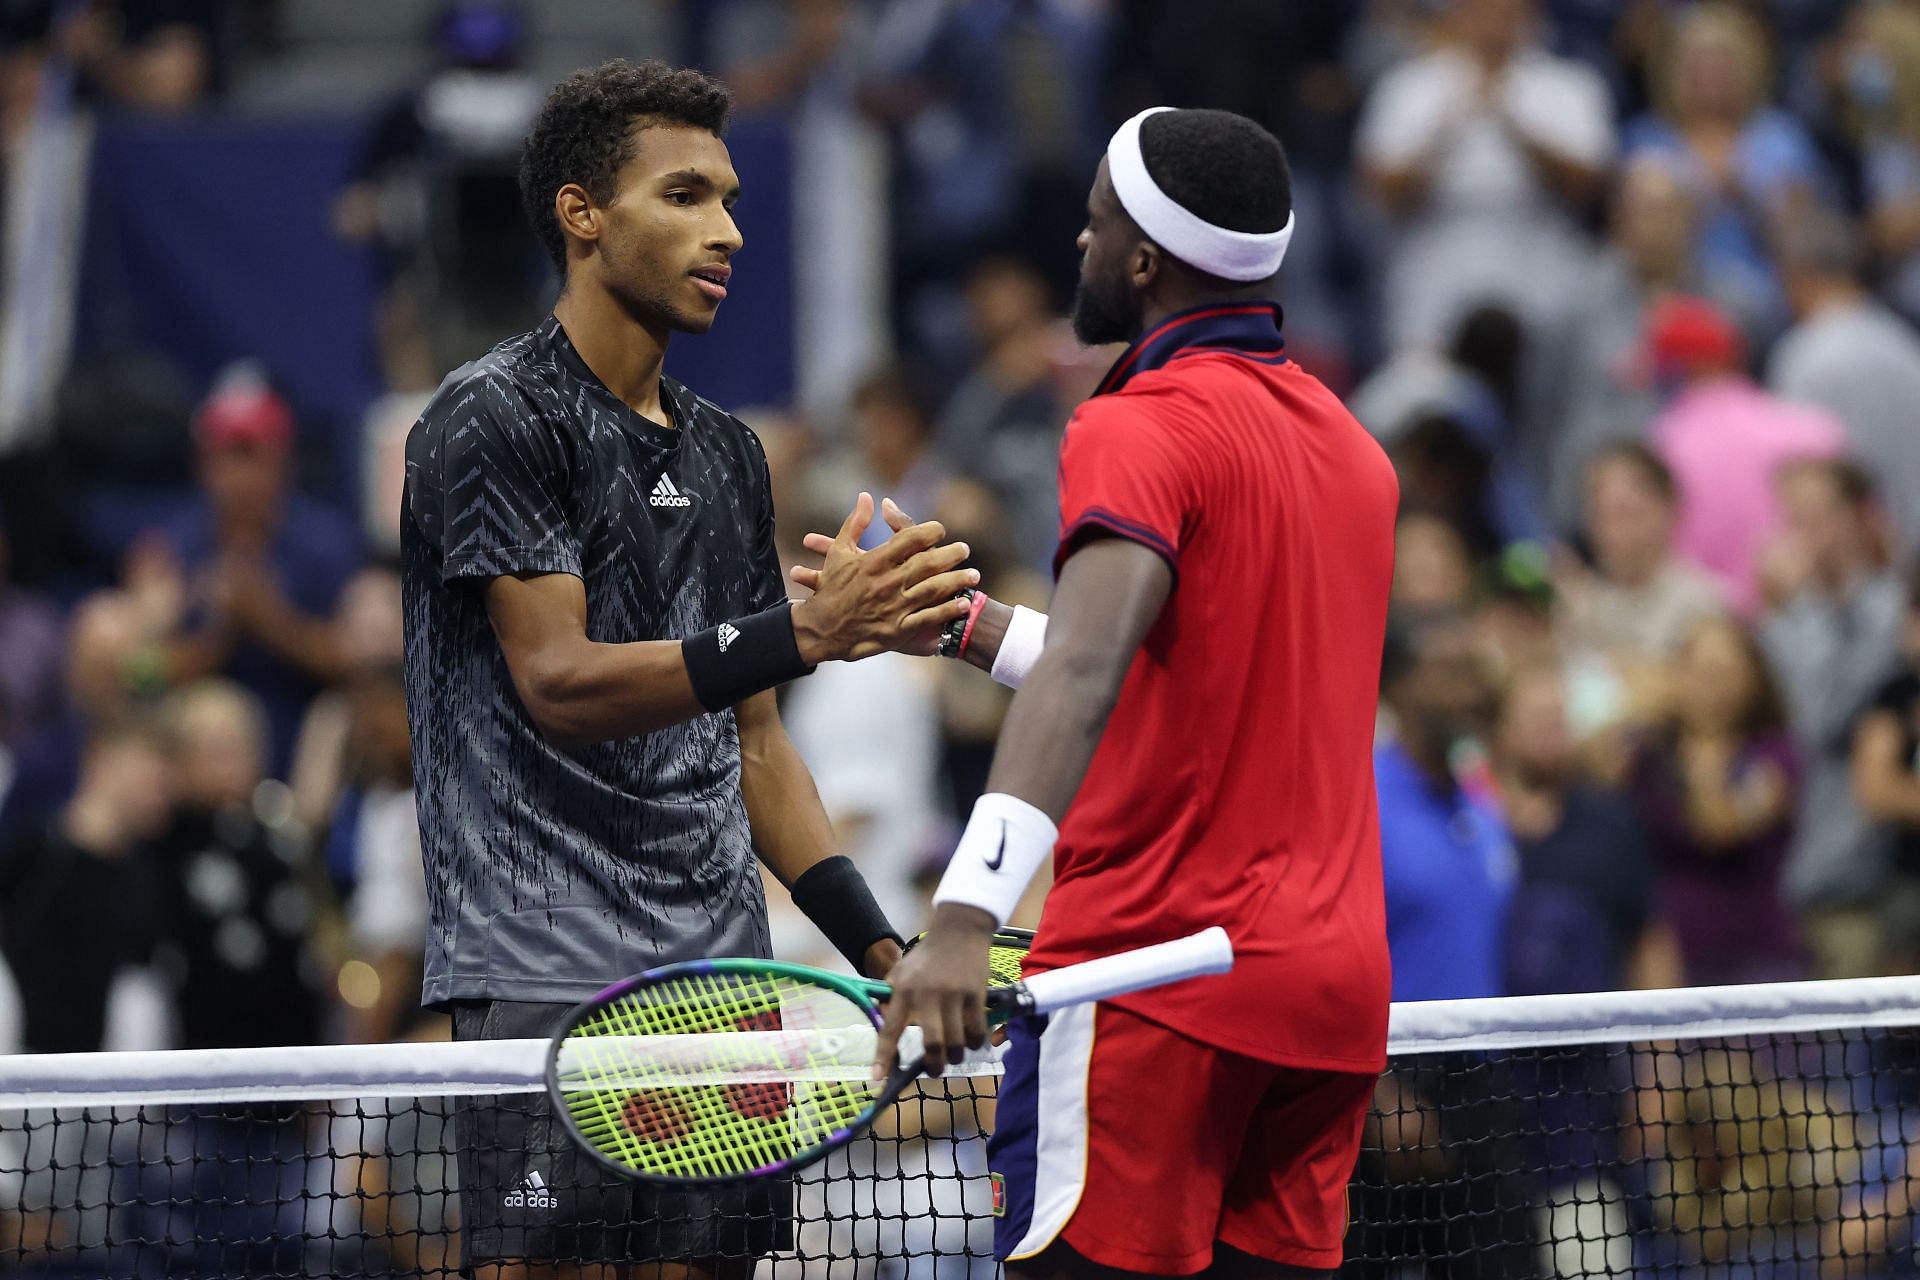 Felix Auger-Aliassime and Frances Tiafoe at the 2021 US Open.